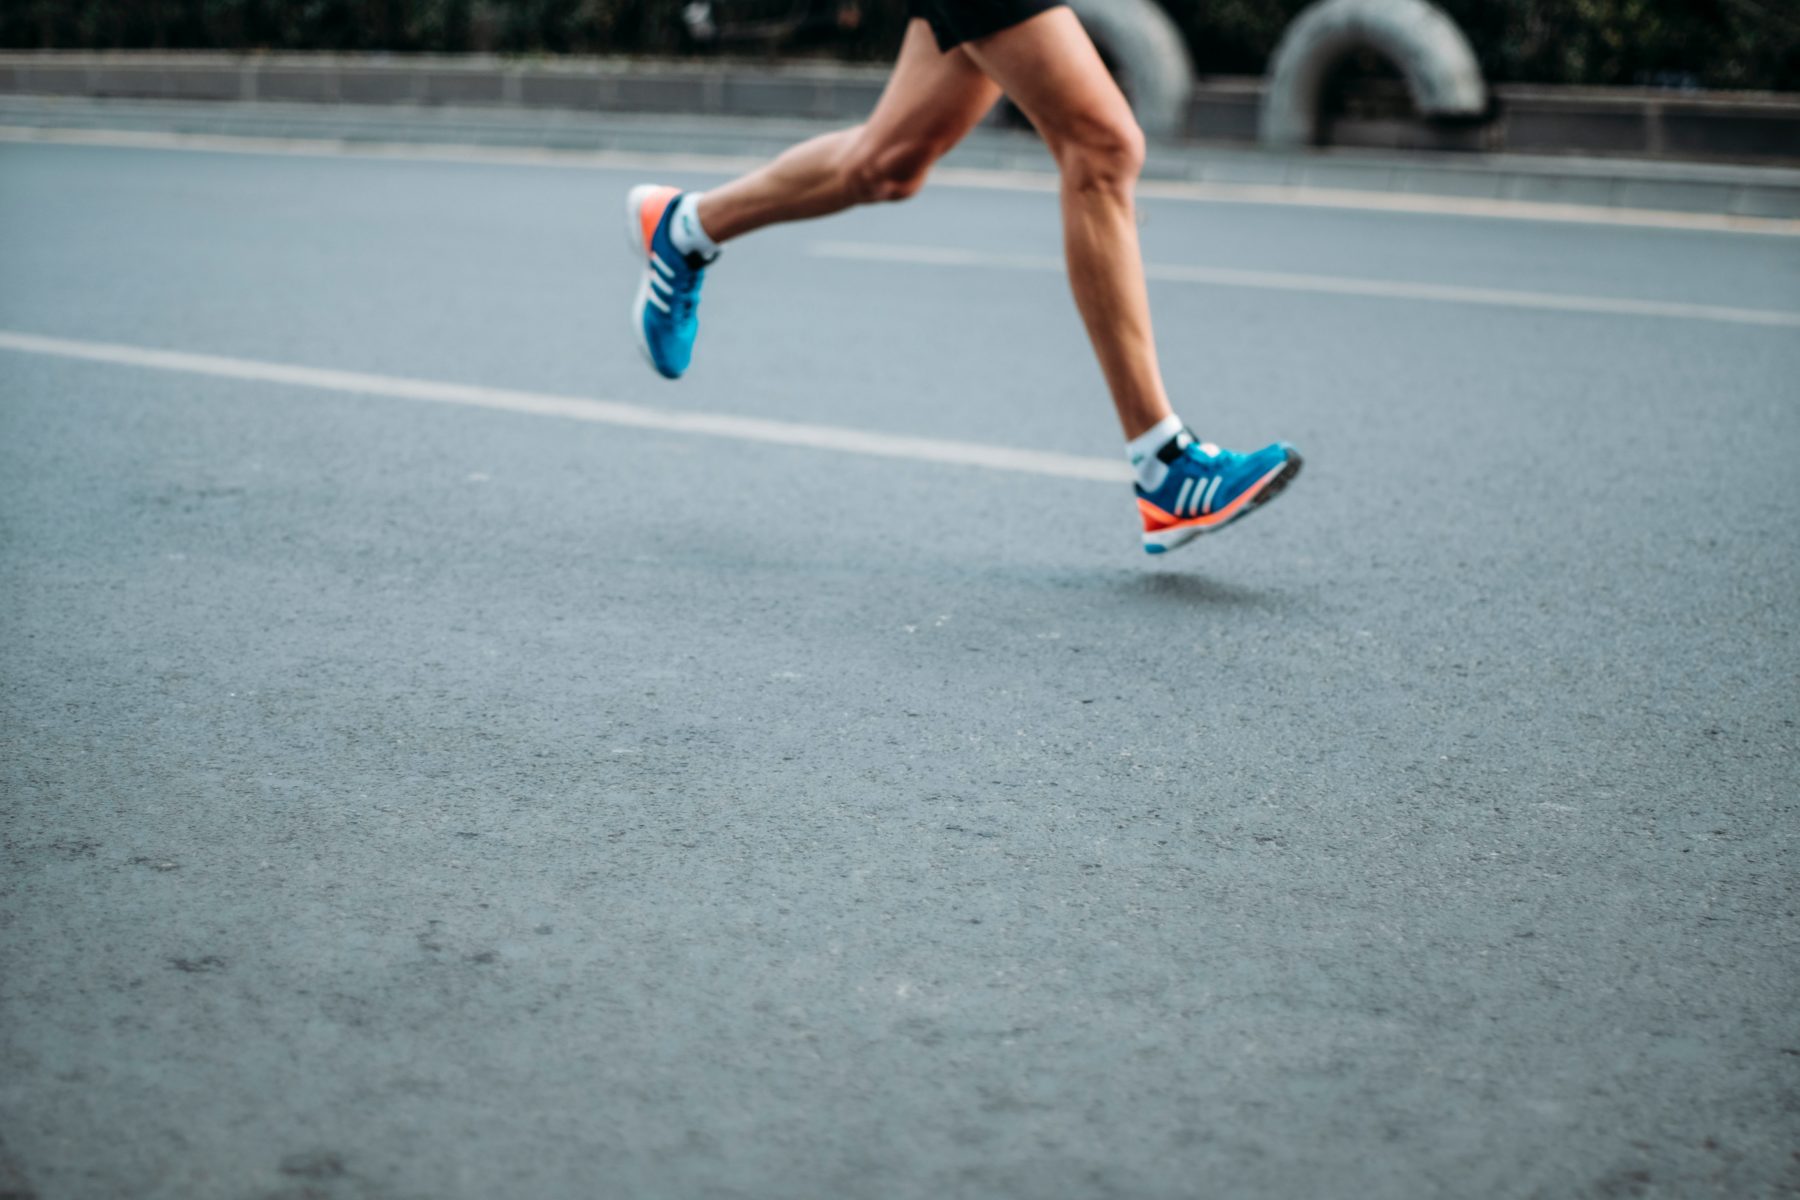 A close up of a person's legs while running.